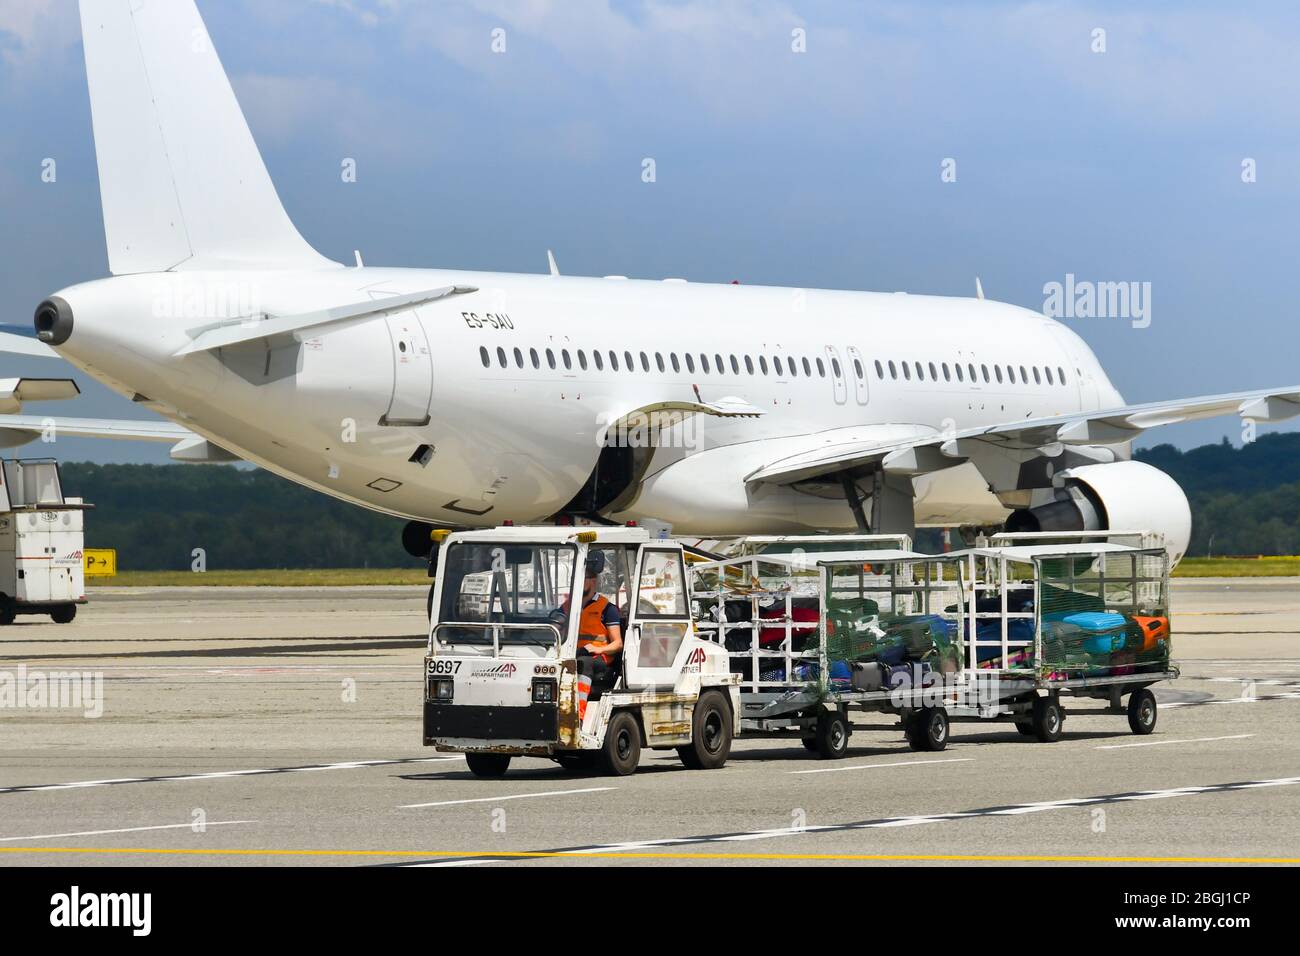 MILAN, ITALY - JUNE 2019: Small tractor pulling luggage trolleys across the apron at Milan Malpensa Airport. In the background, a plane is taxiing Stock Photo